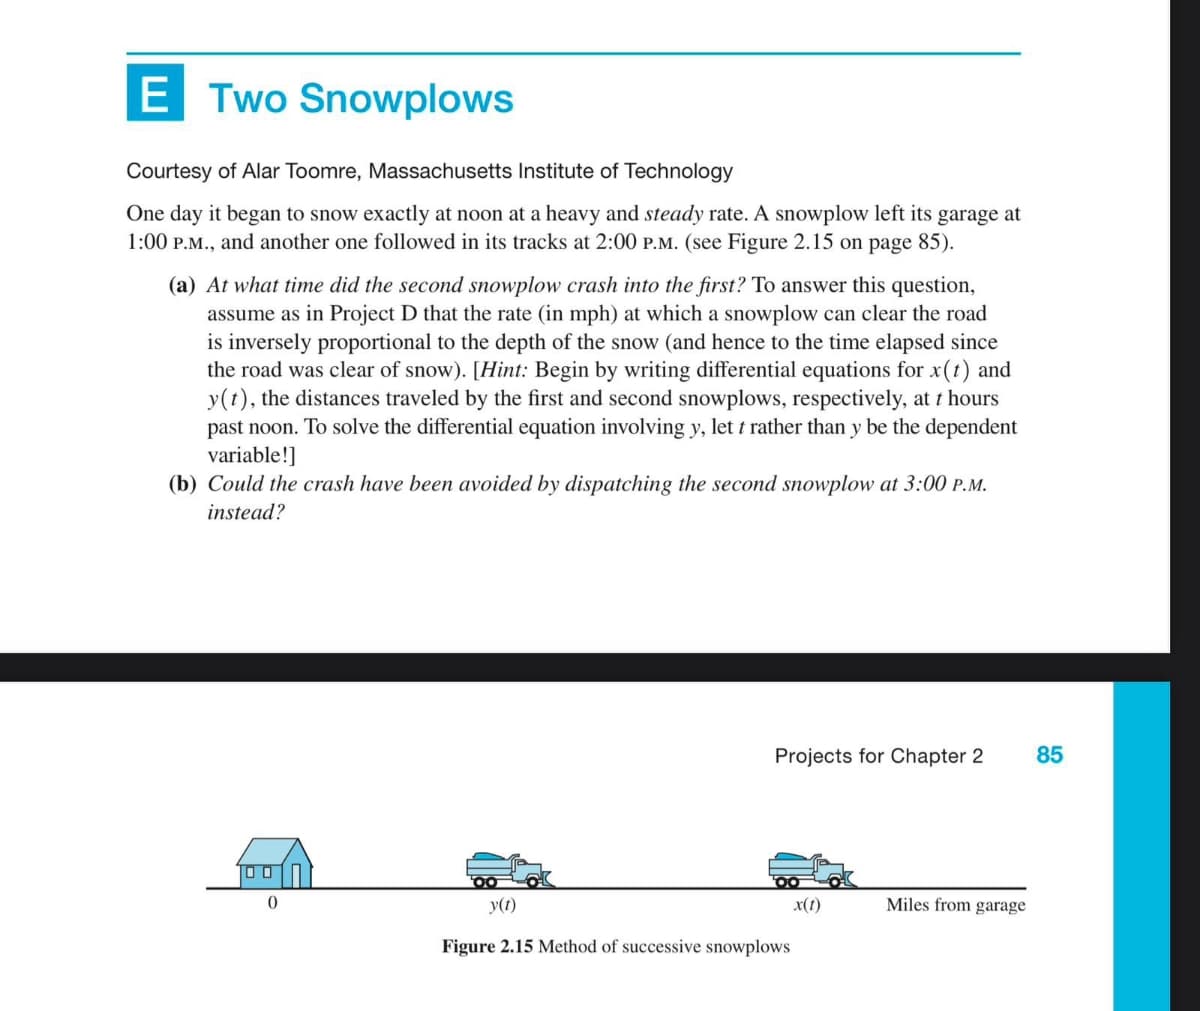 E Two Snowplows
Courtesy of Alar Toomre, Massachusetts Institute of Technology
One day it began to snow exactly at noon at a heavy and steady rate. A snowplow left its garage at
1:00 P.M., and another one followed in its tracks at 2:00 P.M. (see Figure 2.15 on page 85).
(a) At what time did the second snowplow crash into the first? To answer this question,
assume as in Project D that the rate (in mph) at which a snowplow can clear the road
is inversely proportional to the depth of the snow (and hence to the time elapsed since
the road was clear of snow). [Hint: Begin by writing differential equations for x(t) and
y(t), the distances traveled by the first and second snowplows, respectively, at t hours
past noon. To solve the differential equation involving y, let t rather than y be the dependent
variable!]
(b) Could the crash have been avoided by dispatching the second snowplow at 3:00 P.M.
instead?
0
Projects for Chapter 2 85
y(t)
Figure 2.15 Method of successive snowplows
x(t)
Miles from garage